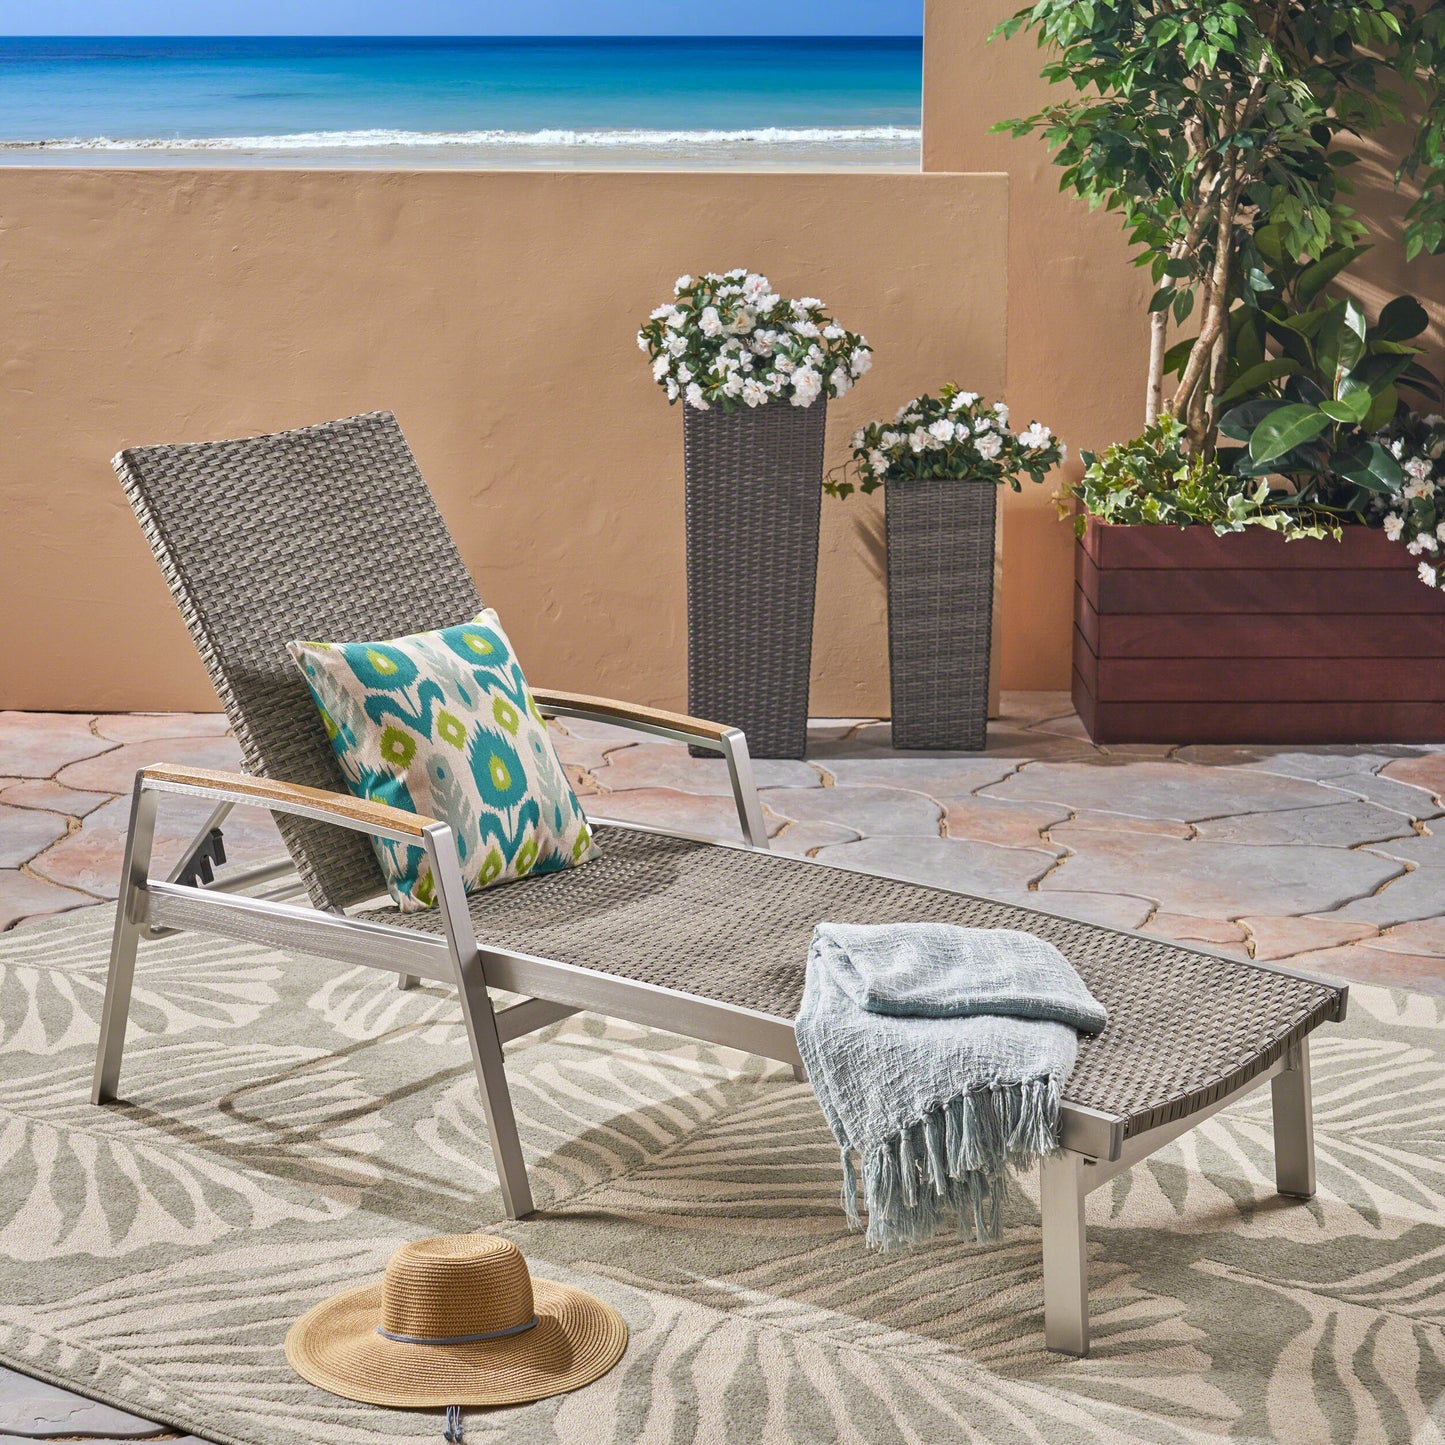 Joy Outdoor Wicker and Aluminum Chaise Lounge, Gray Finish